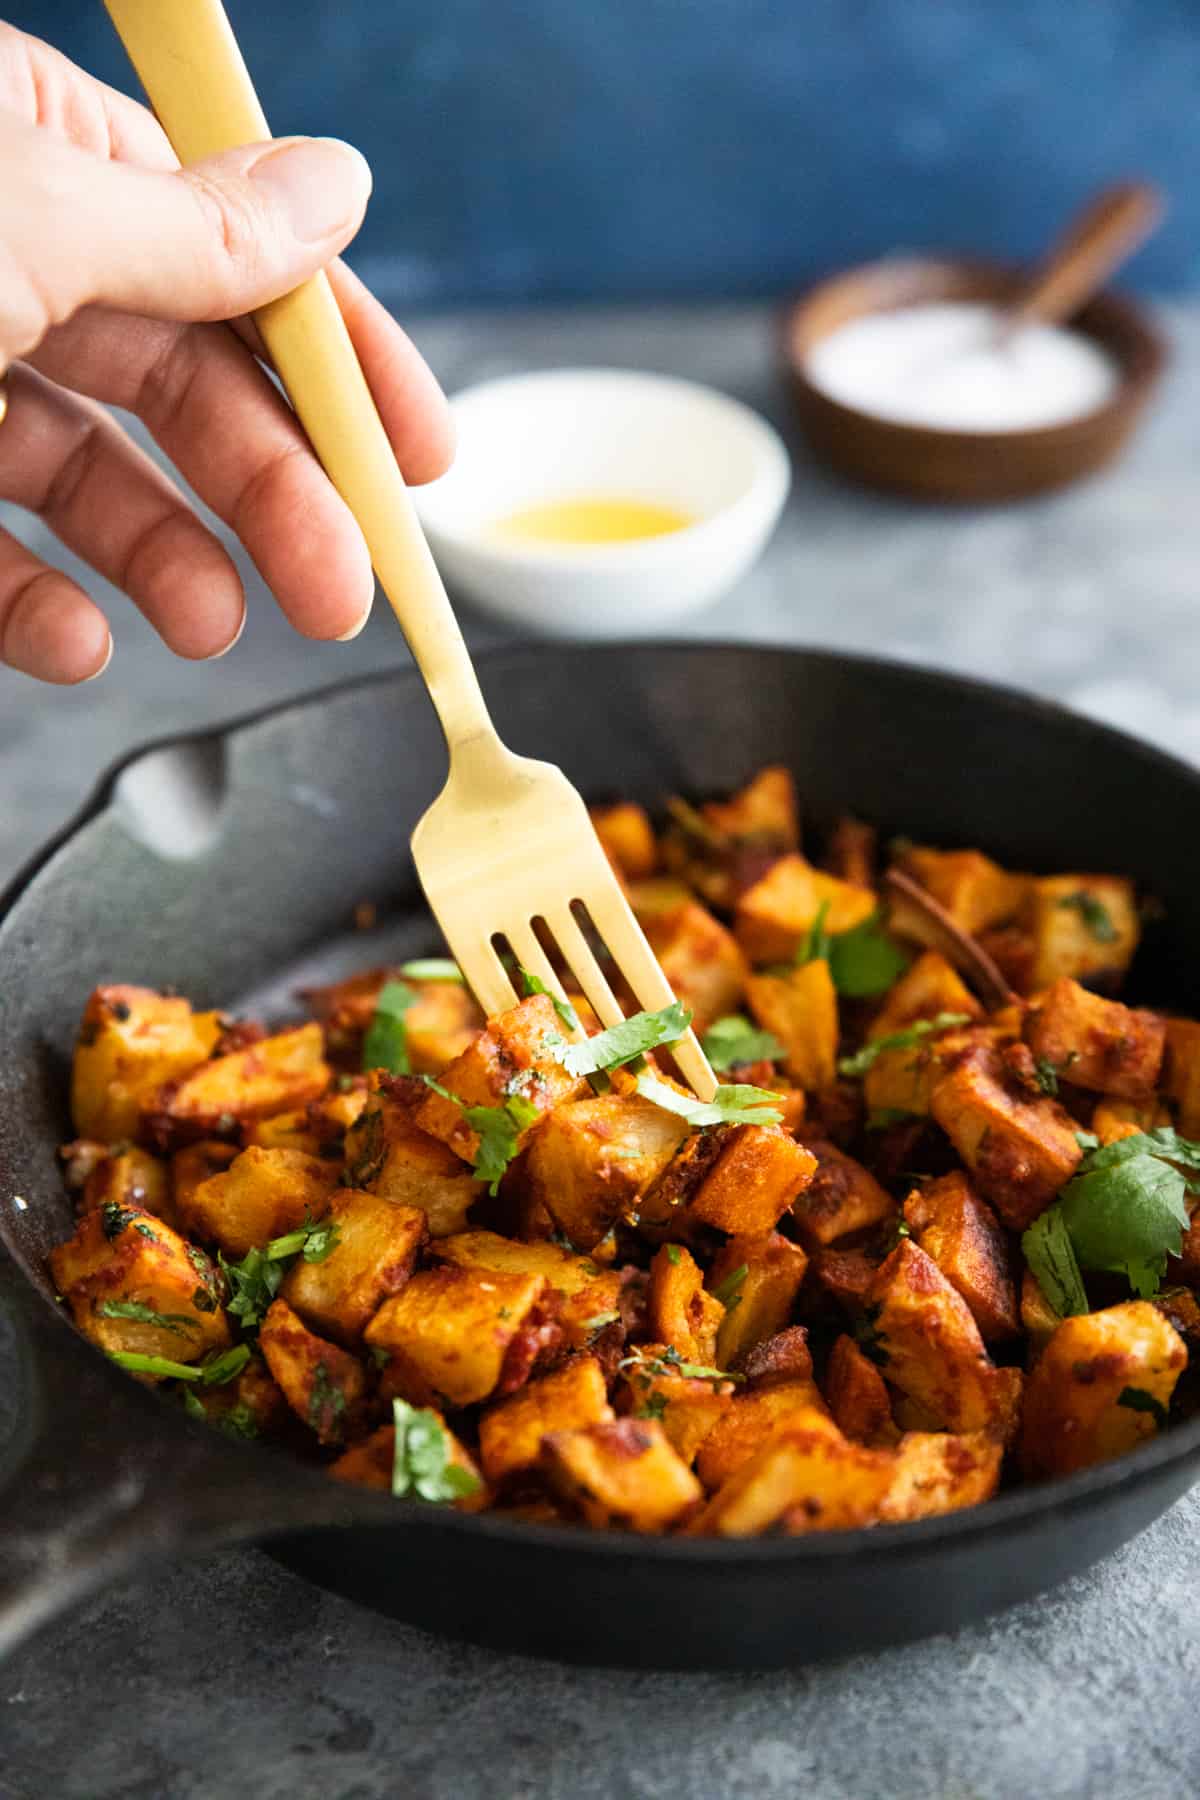 Batata harra is a spicy Middle Eastern potato side dish. It calls for just a few ingredients and is easy to make. Crispy and tender potatoes are tossed in a spicy garlic and cilantro sauce and finished with a squeeze of lemon.
